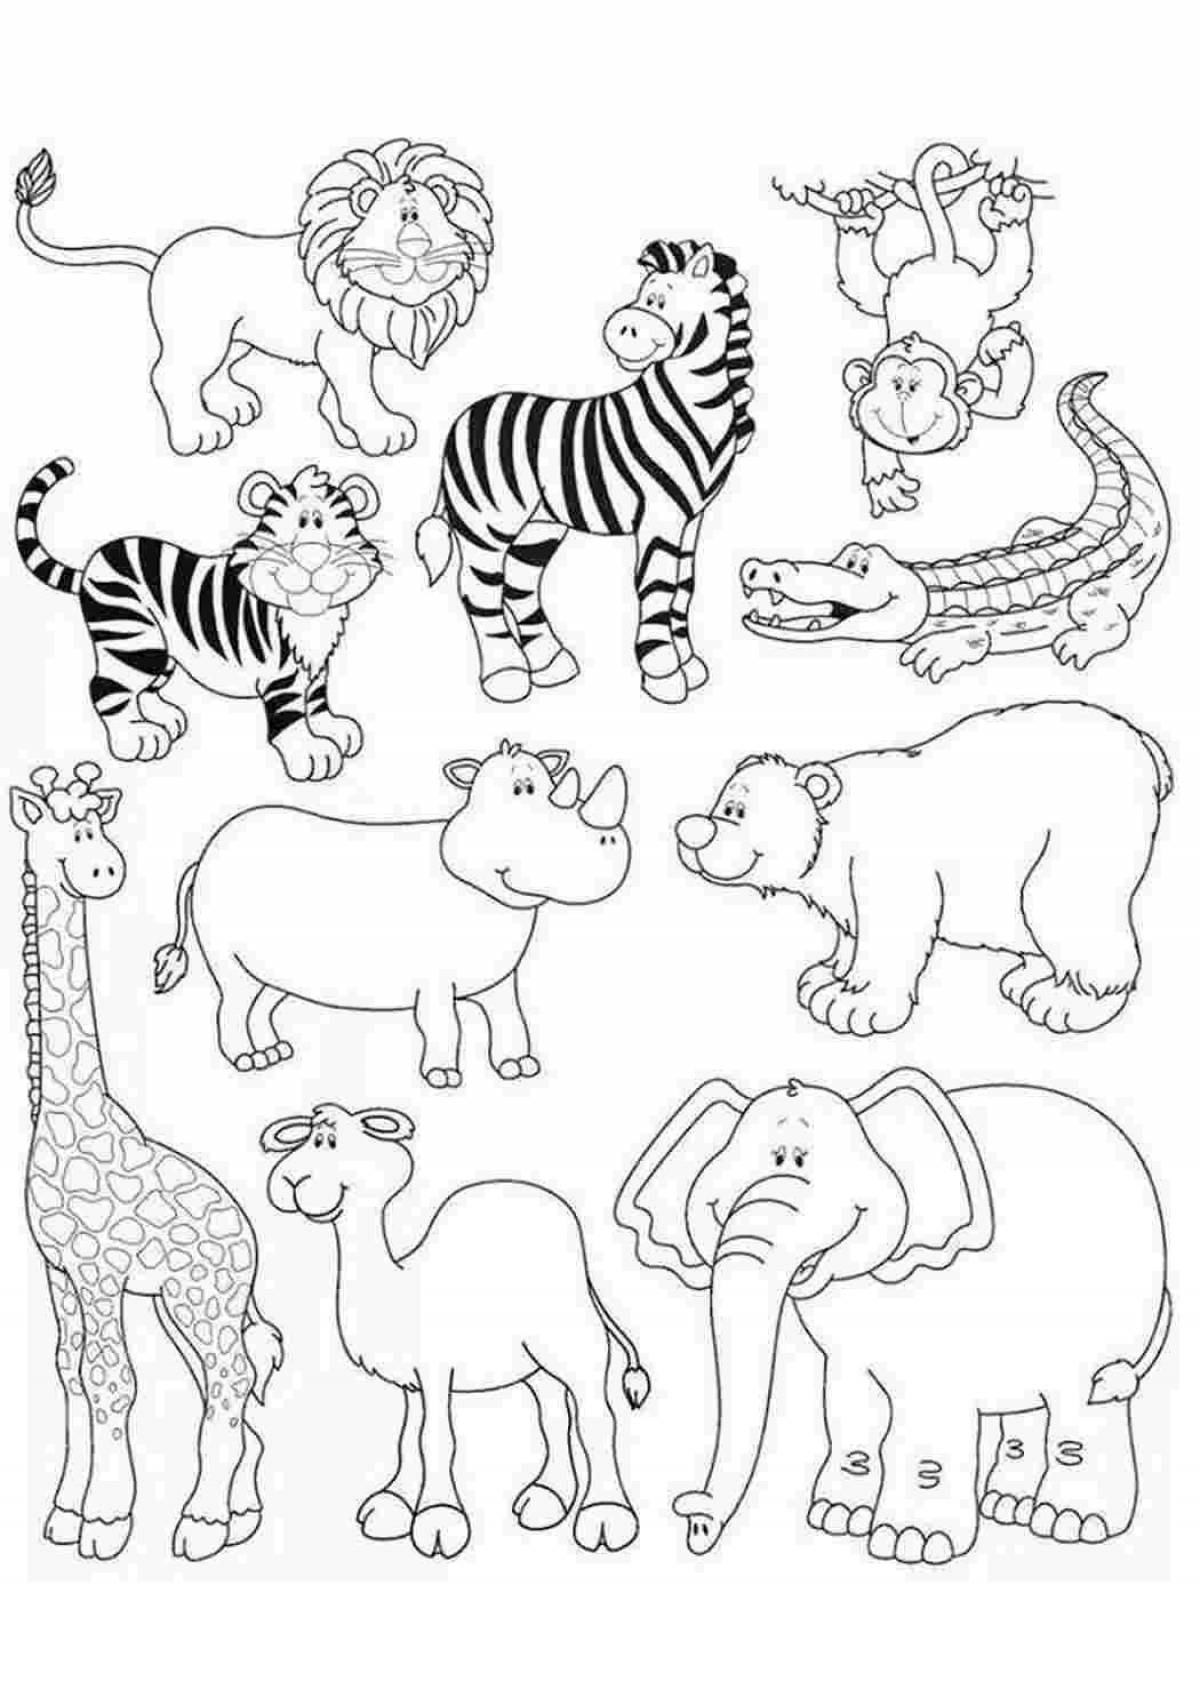 Innovative wild animal coloring page for preschoolers